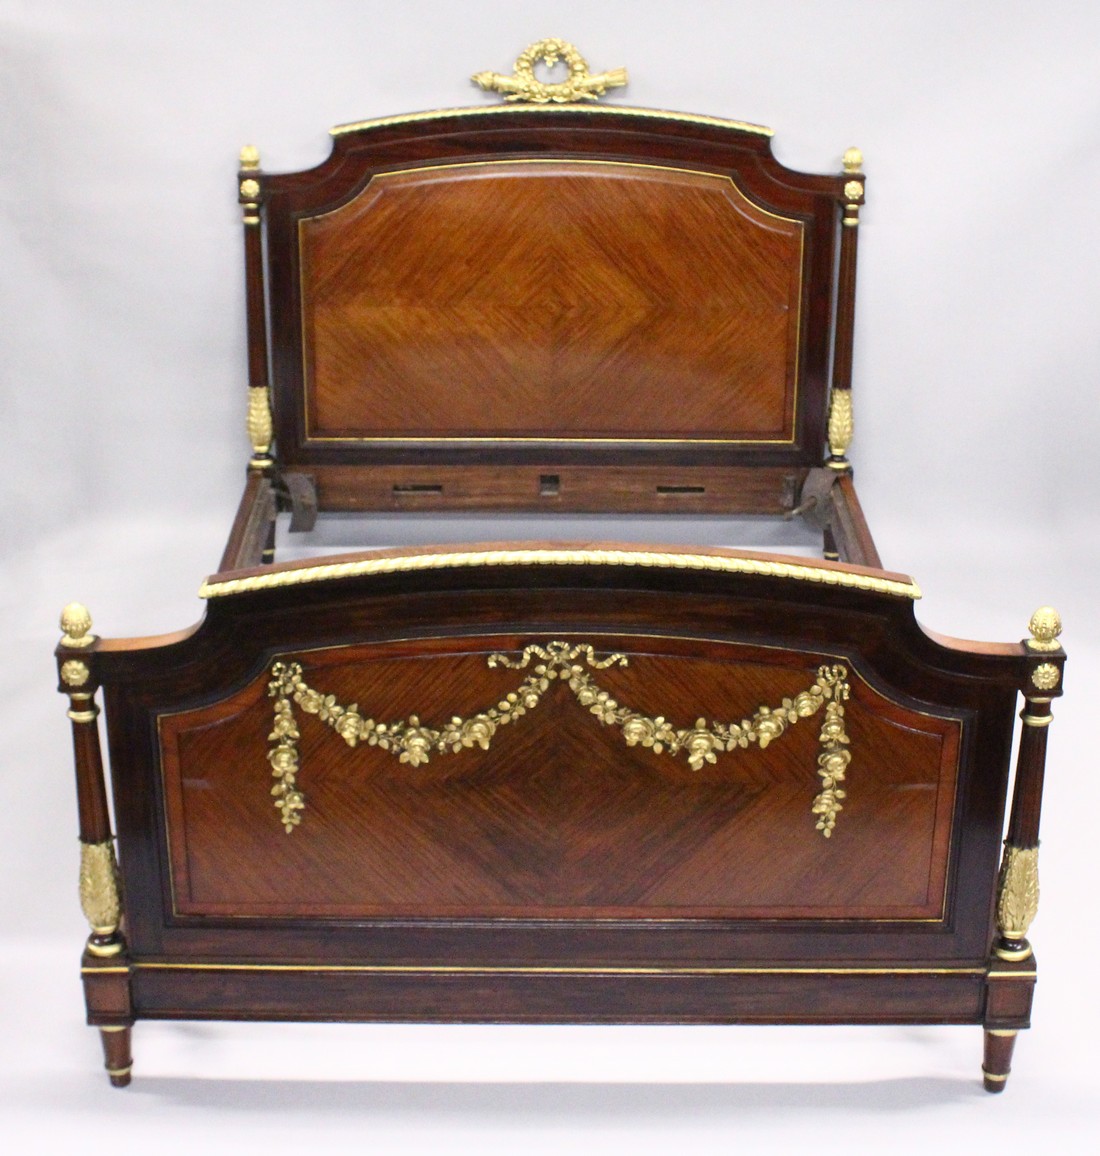 A GOOD LATE 19TH CENTURY FRENCH LOUIS XVI STYLE KINGWOOD MAHOGANY AND ORMOLU BED FRAME, the